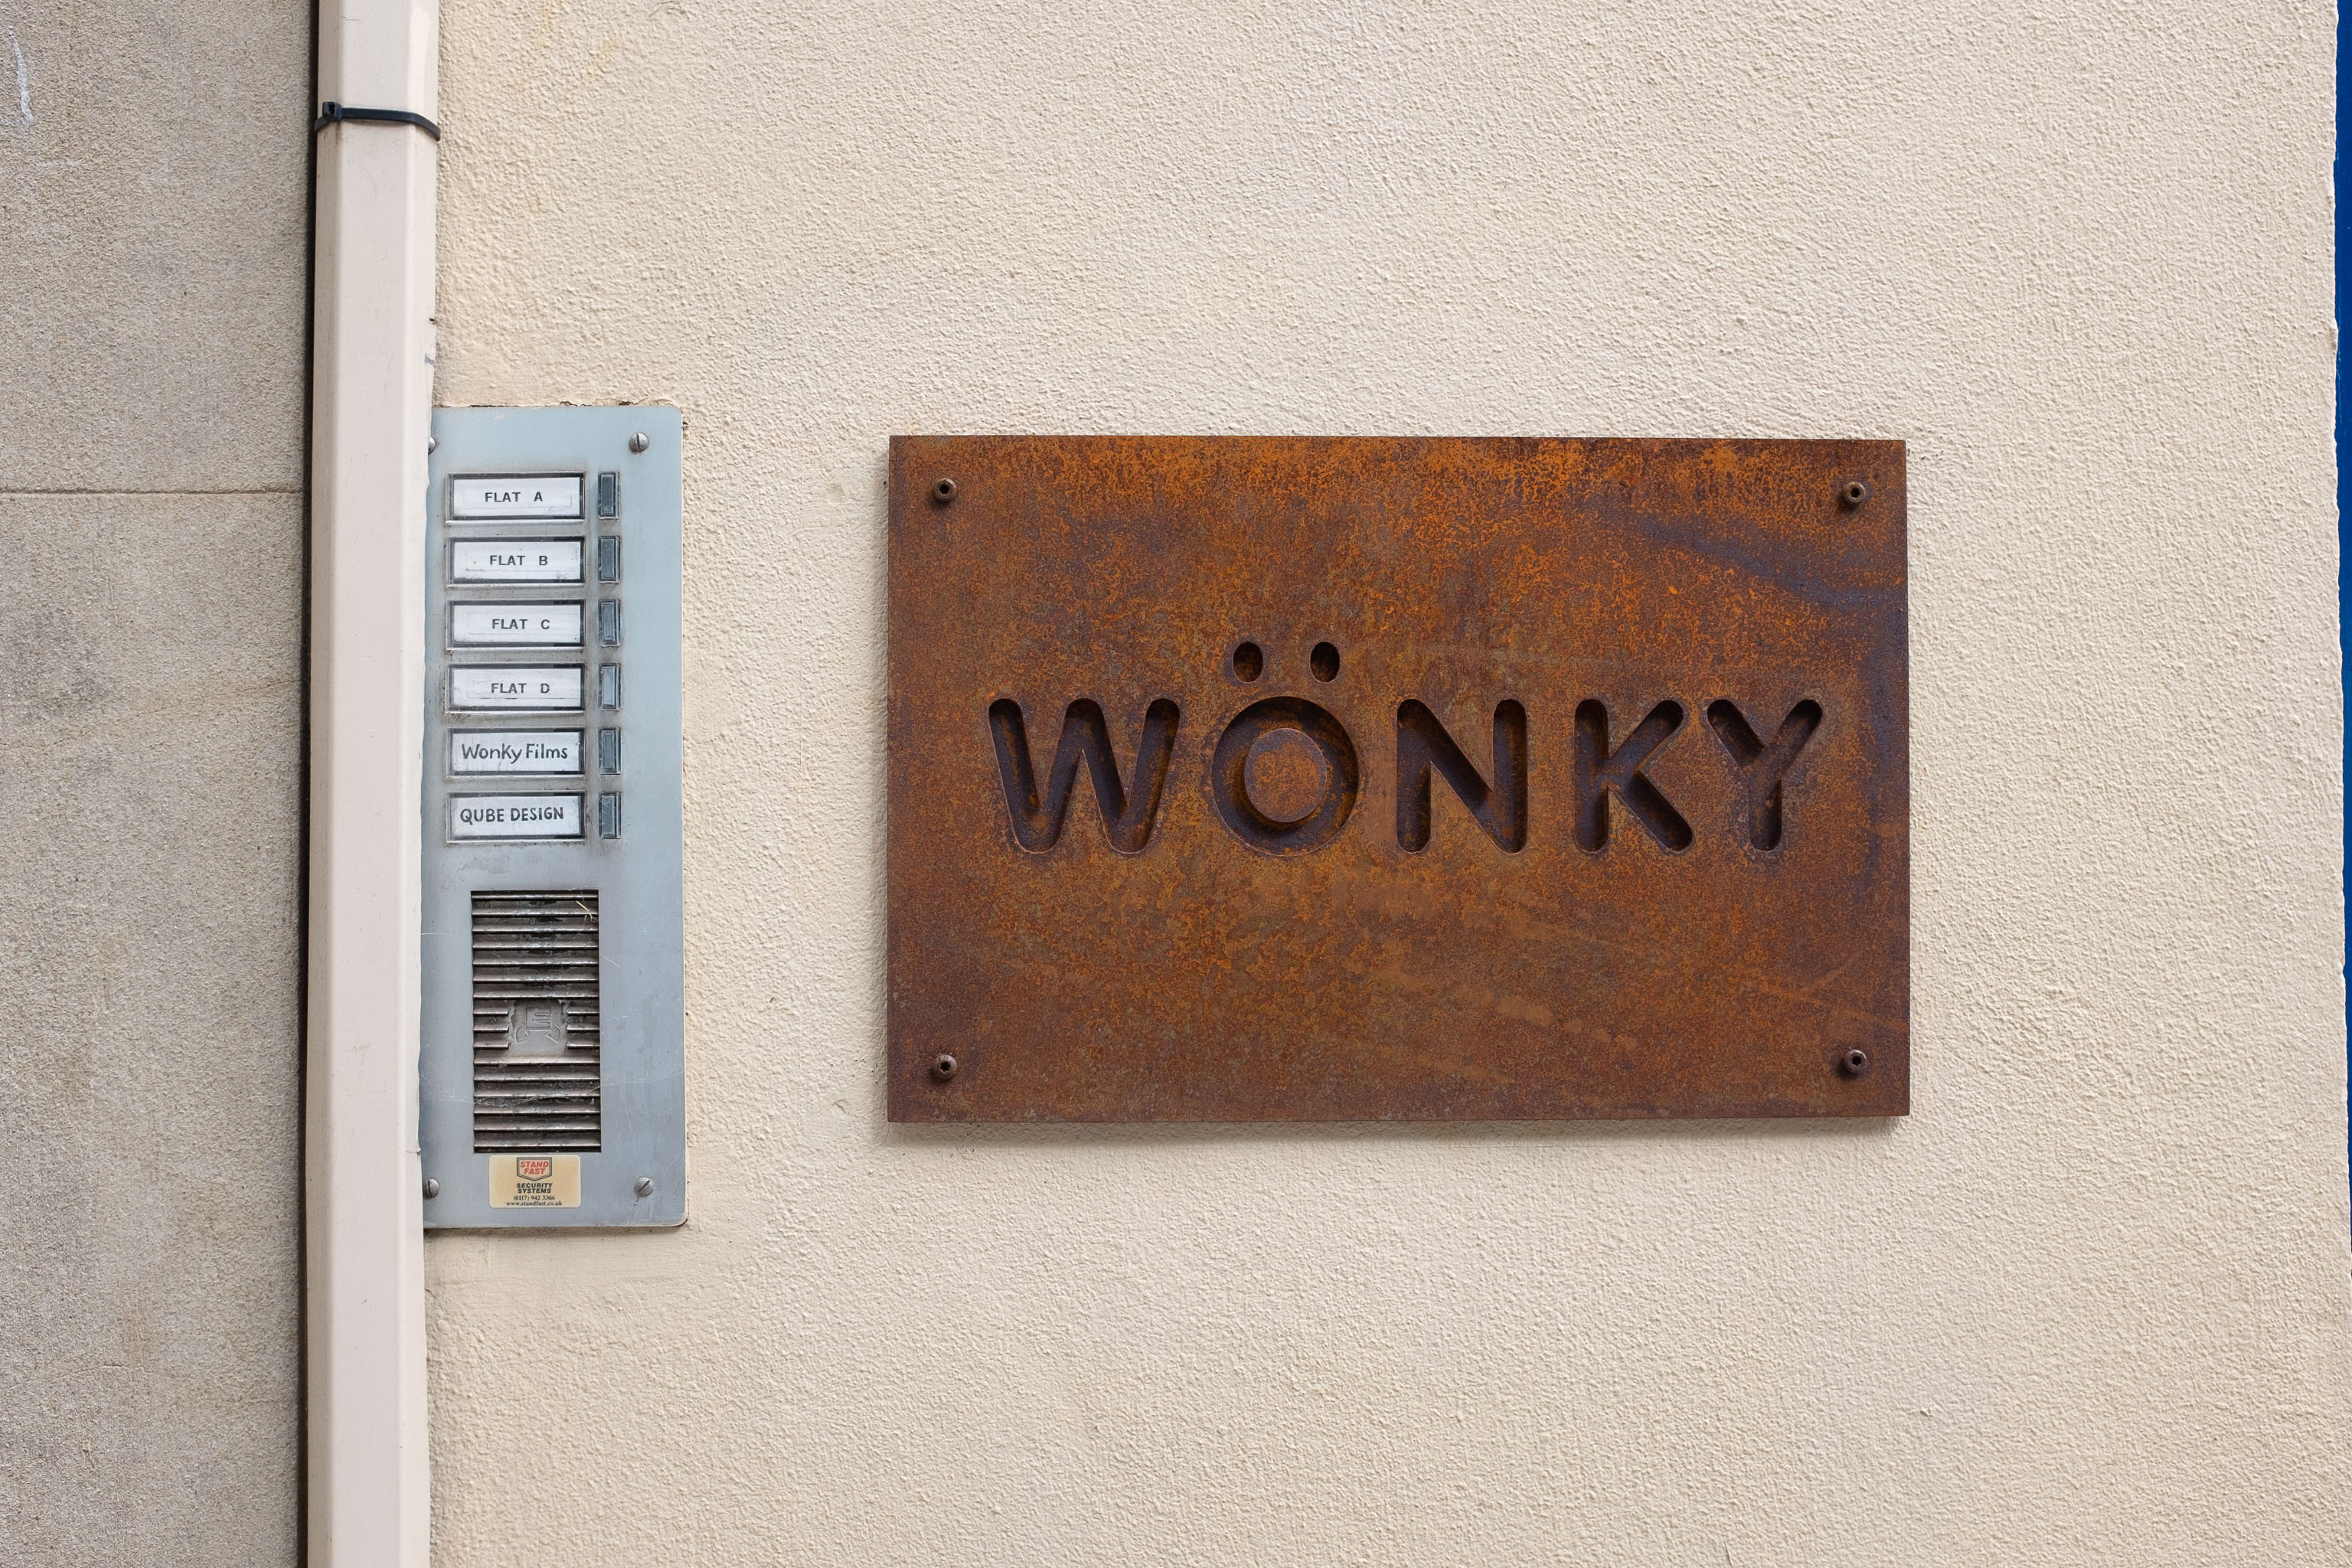 WÖNKY
I'd have been so tempted to put the sign up on a slight tilt.
